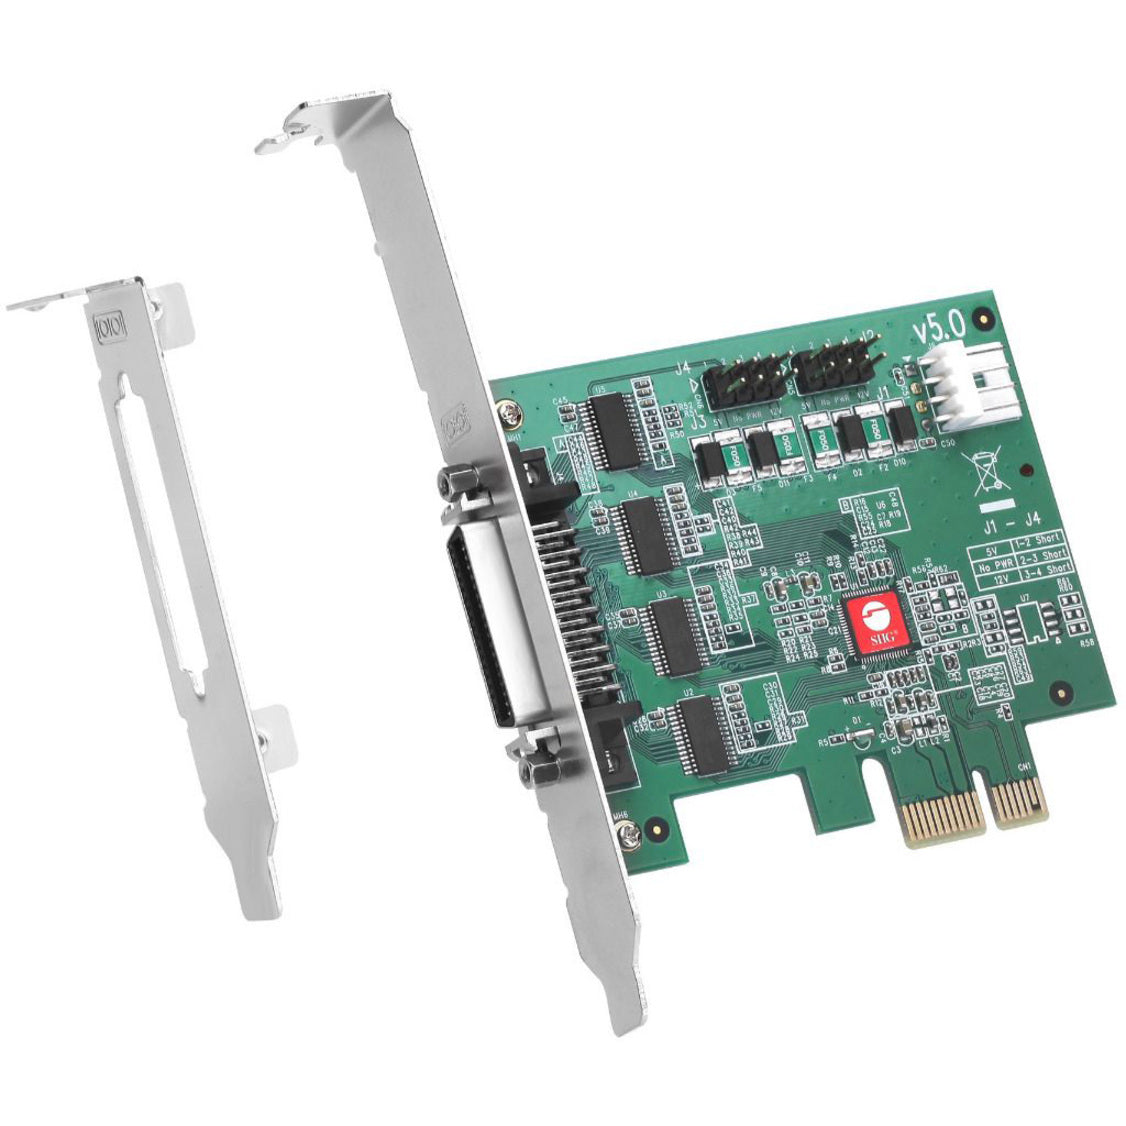 SIIG JJ-E40011-S5 DP CyberSerial 4S PCIe Board, 4xRS-232 Serial Ports